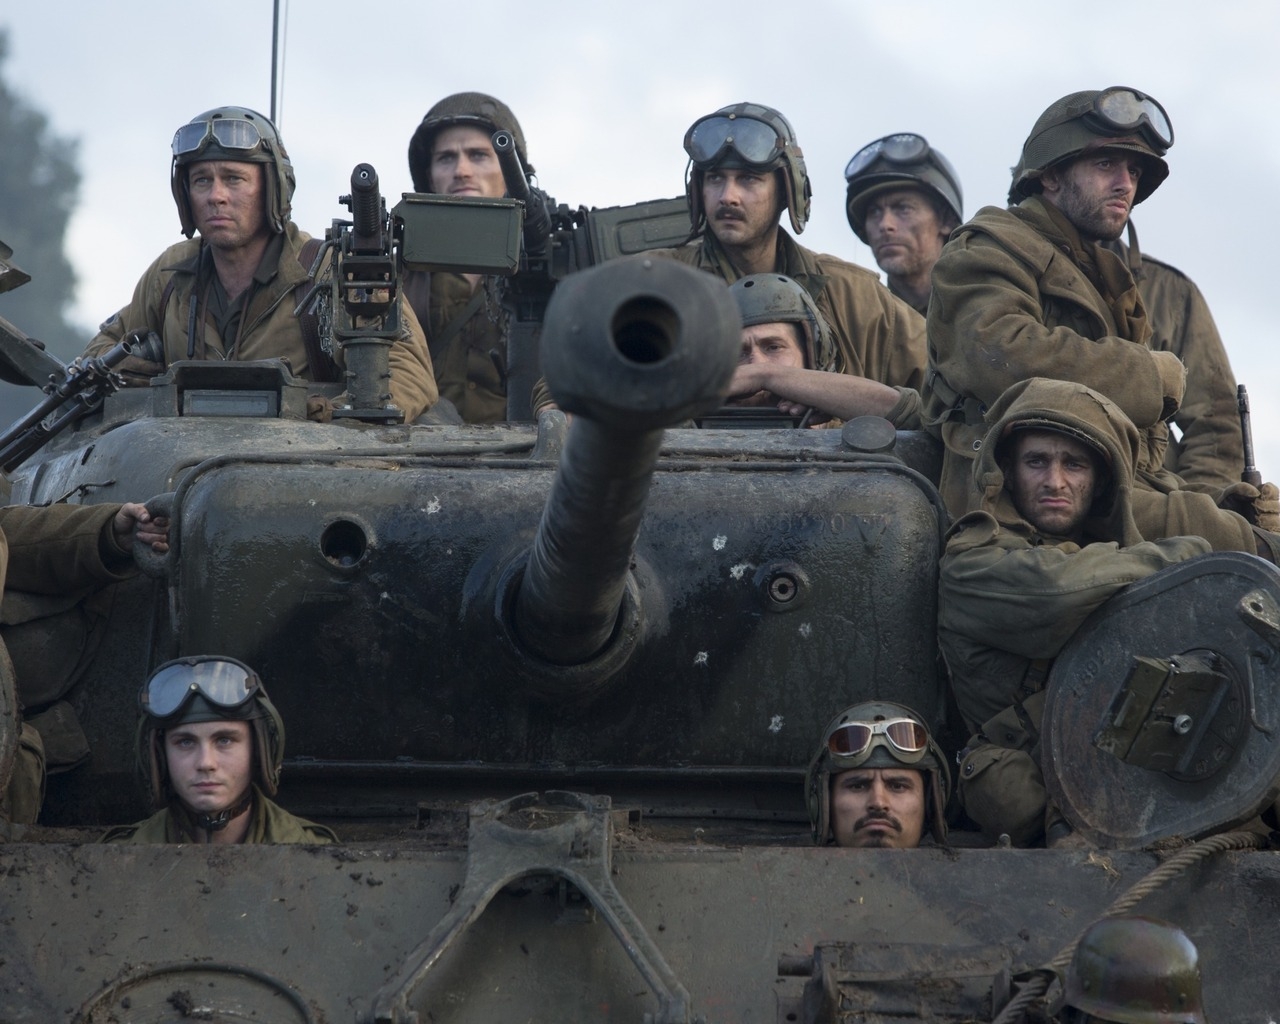 Fury Movie 2014 for 1280 x 1024 resolution